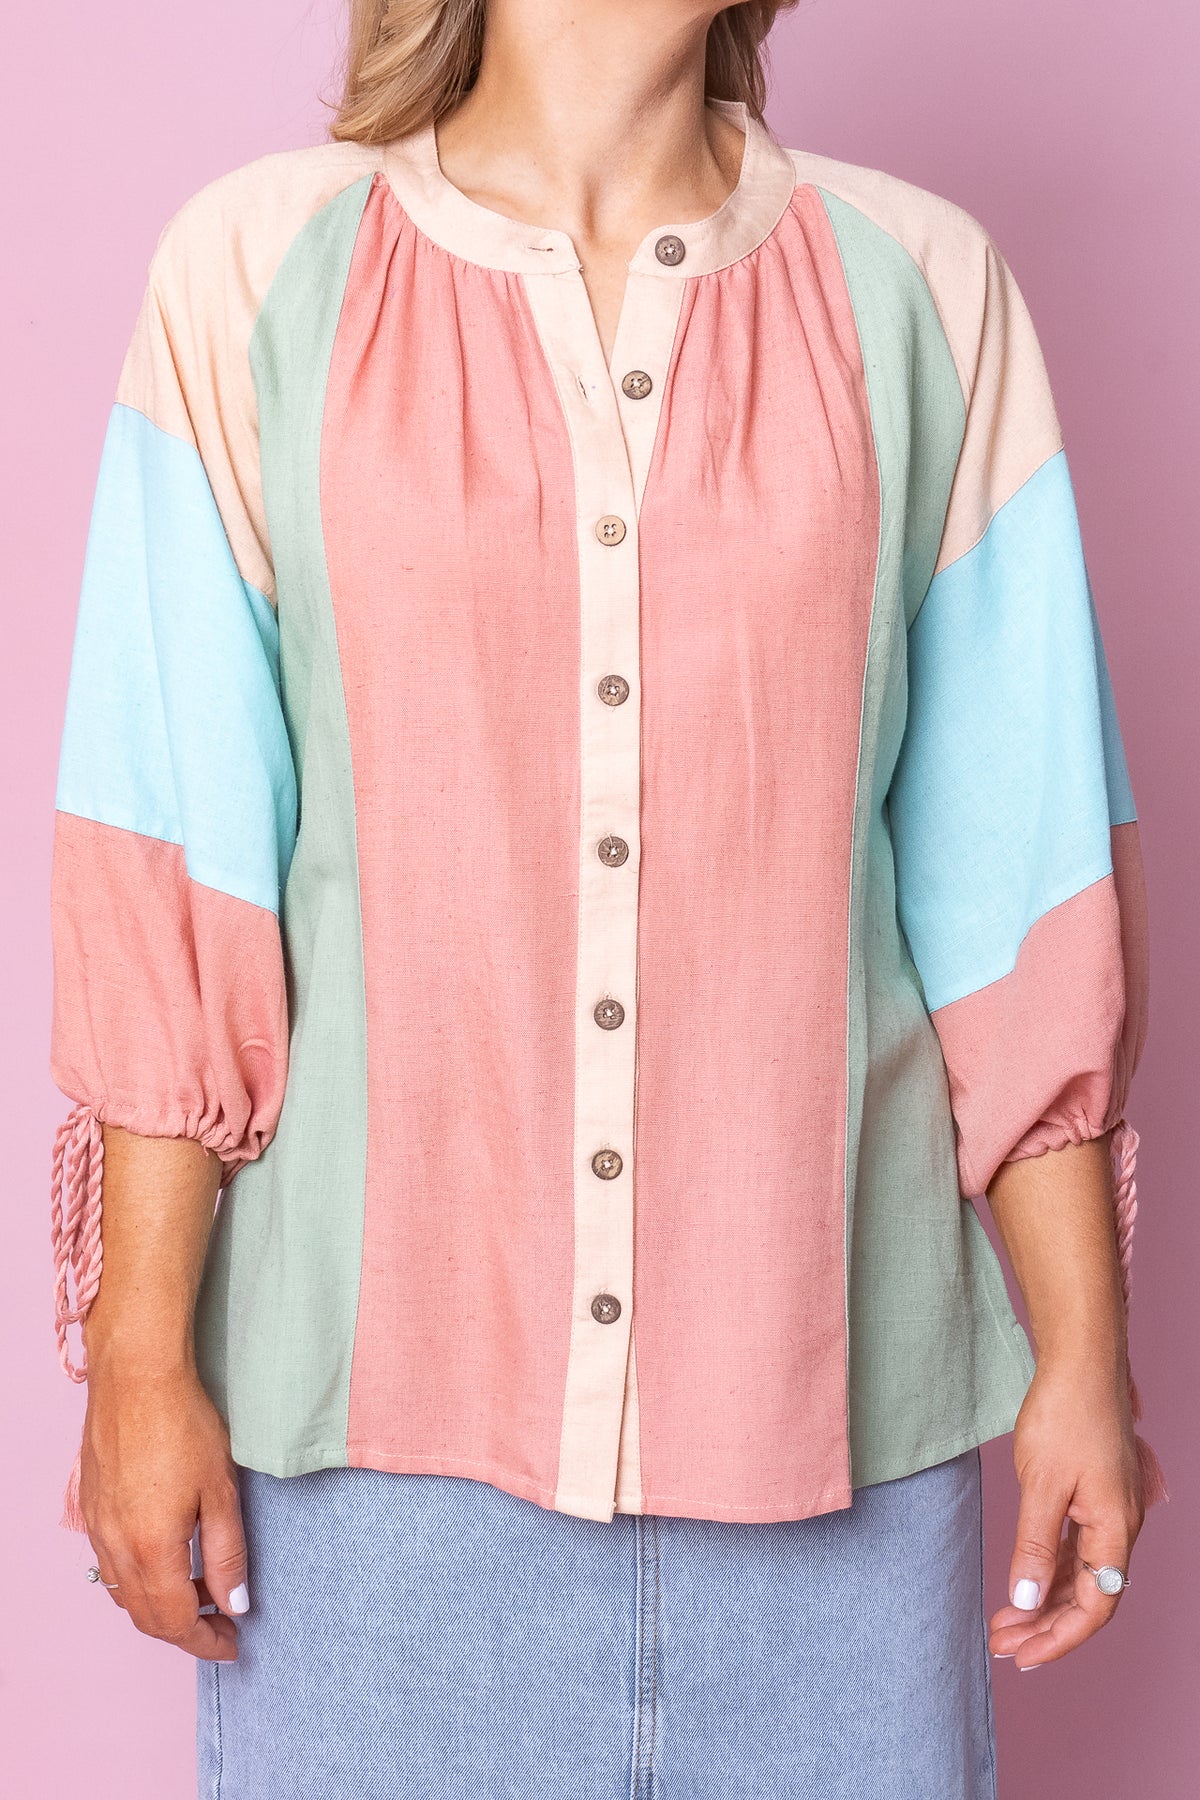 Athena Top in Pink Multi